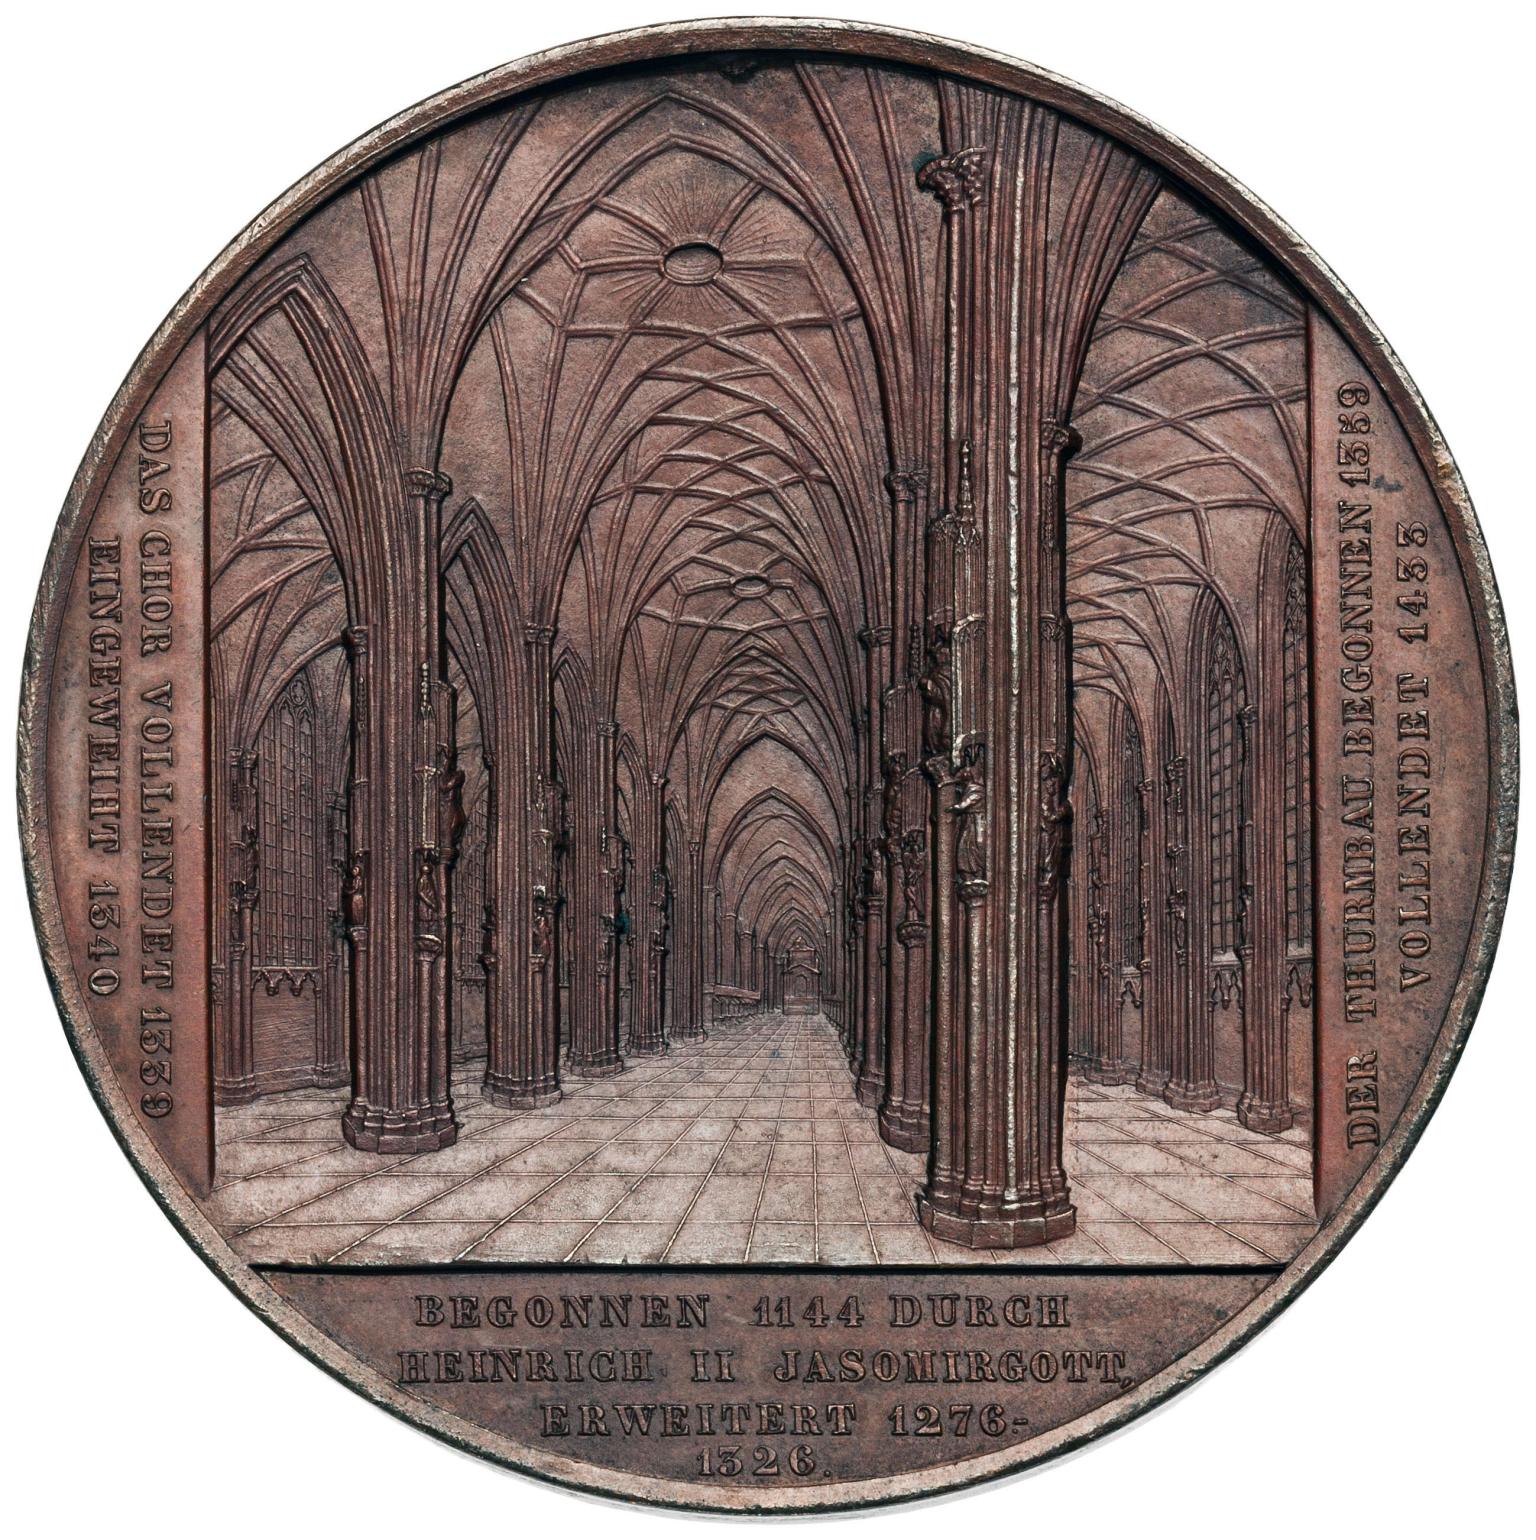 Medal with interior of cathedral.